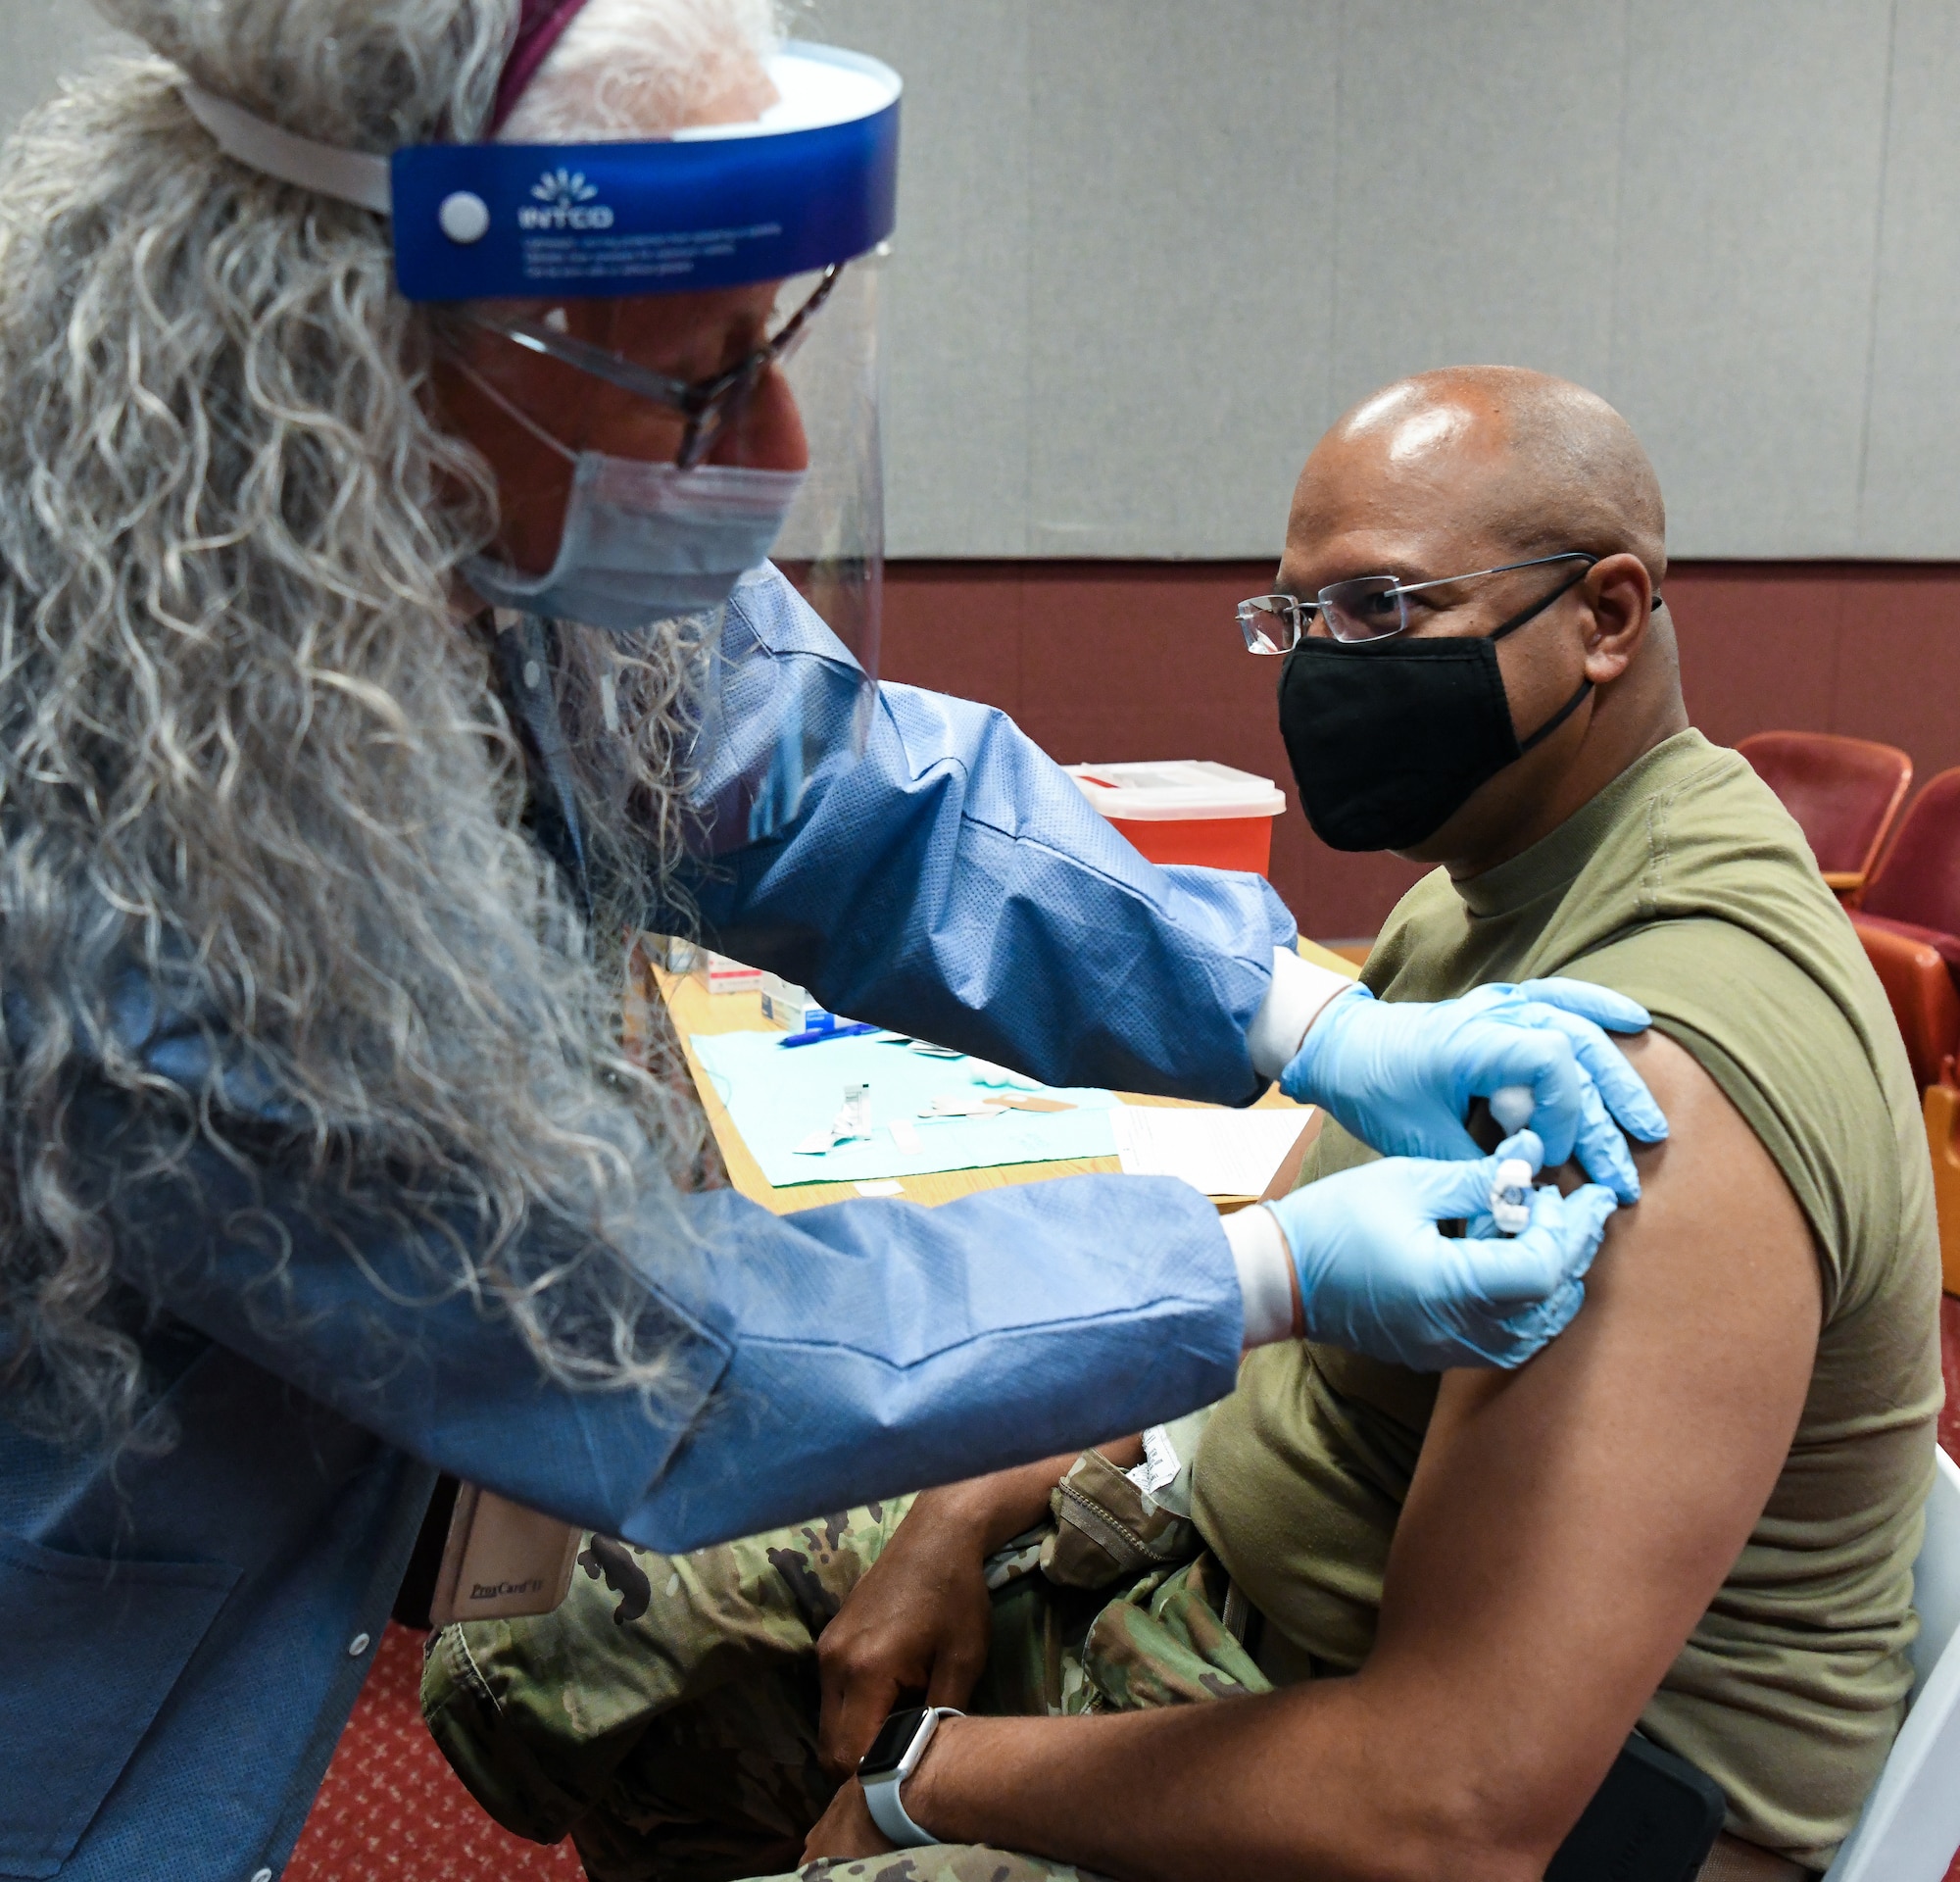 Darla Sain, a registered nurse with the Tullahoma office of the Coffee County Health Department, administers a flu vaccine to Col. Linc Bonner, chief of the Test Division, Oct. 20, 2021, during a flu vaccine clinic held at Arnold Air Force Base, Tenn. The clinic was conducted by the Coffee County Health Department with support from the Arnold AFB Medical Aid Station for individuals with access to the base. During the clinic, 141 individuals were vaccinated. (U.S. Air Force photo by Jill Pickett)